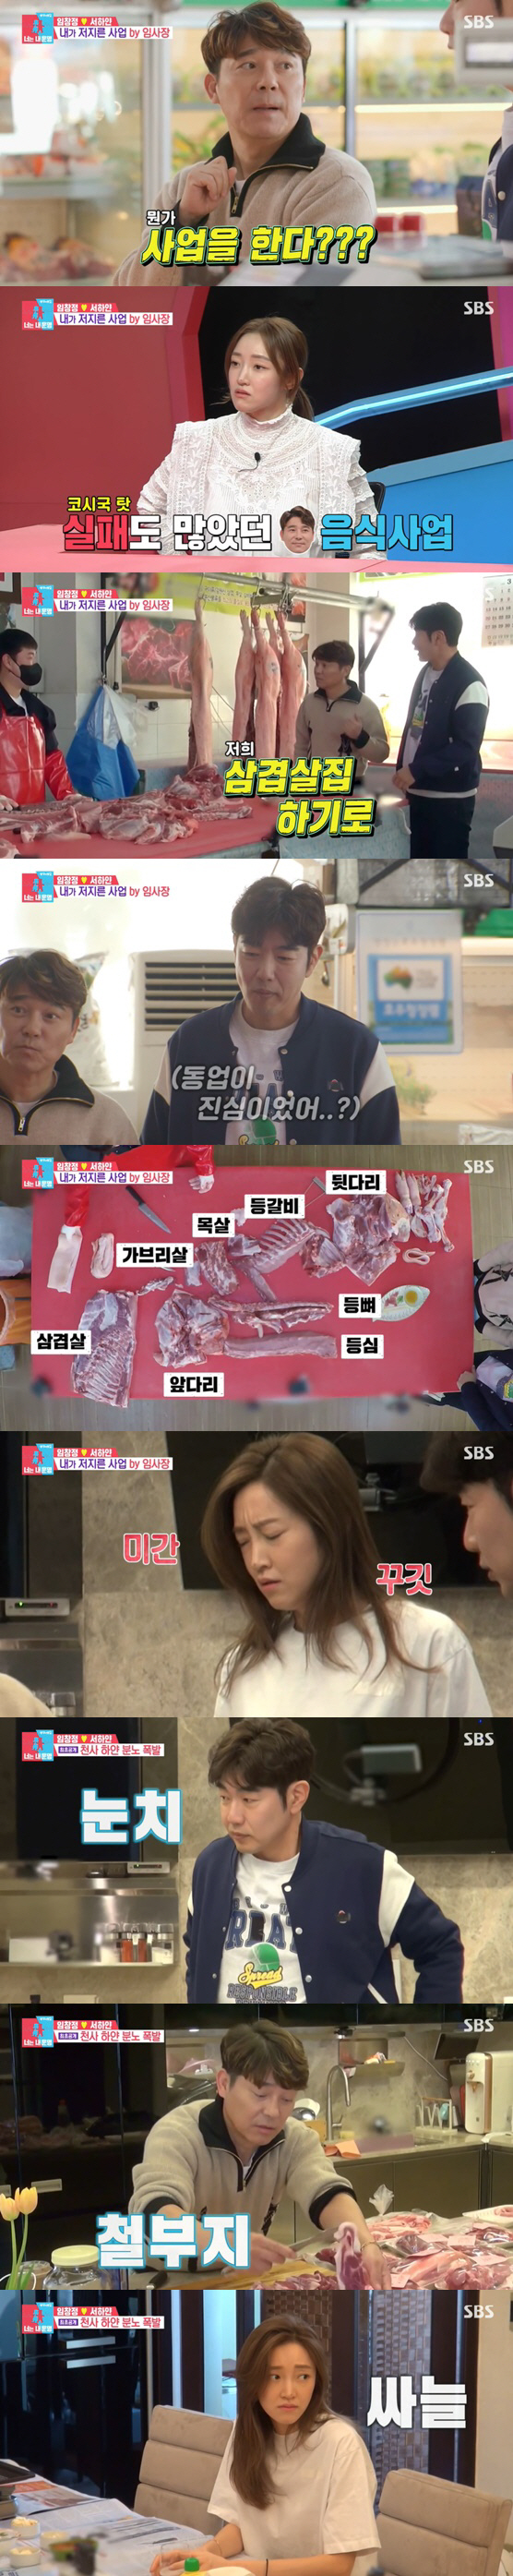 Seo Ha-yan has rightly adapted her husband Im Chang-jungs new business item.In the SBS entertainment Same Bed, Different Dreams 22 - You Are My Destiny (hereinafter referred to as Same Bed, Different Dreams 22), which was broadcast on the afternoon of the 18th, Im Chang-jung was shown proposing business items to his best friend Lee Jong-hyeok.On that day, Im Chang-jung met his best friend Lee Jong-hyeok, who was right for drinking, billiards and golf triads. The two men visited the butcher once and boldly bought a pig.Im Chang-jung proposed a meat-and-hook item to Lee Jong-hyeok, and Lee Jong-hyeok refused to do not intend to shop but Im Chang-jung did not give up.Seo Haiyan sighed, There were many failures in the food business, and there are many places that have been closed because of Corona 19.In the end, Im Chang-jung bought 500,000 won worth of meat for each part, went home with Lee Jong-hyeok, and Seo Haiyan gave a pin to Im Chang-jung, who said, There is no room in the refrigerator.Im Chang-jung, who did not care, baked meat and showed a breakage, especially the breakage is the main.However, Lee Jong-hyeok, who ate the break-up of Im Chang-jung, laughed when he said coolly that something is not special.Im Chang-jung showed the ambitious secret soy sauce made from soy sauce of soy sauce, and Lee Jong-hyeok and Seo Haiyan, who tasted it, praised it as fine this time.But the opposition to the new project continued: Everything from one to ten makes no sense, West Hayan said, and above all, West Hayan said, Where is the deposit?Nevertheless, Im Chang-jung continued to persuade Lee Jong-hyeok, saying, Ive seen a shop spot, Ive been ready for three months.There are so many loans we cant pay off, this house is also rented, its also a tough place to manage the store thats currently there, more than half of it is closed, West White said, without spared a realistic direct statement.